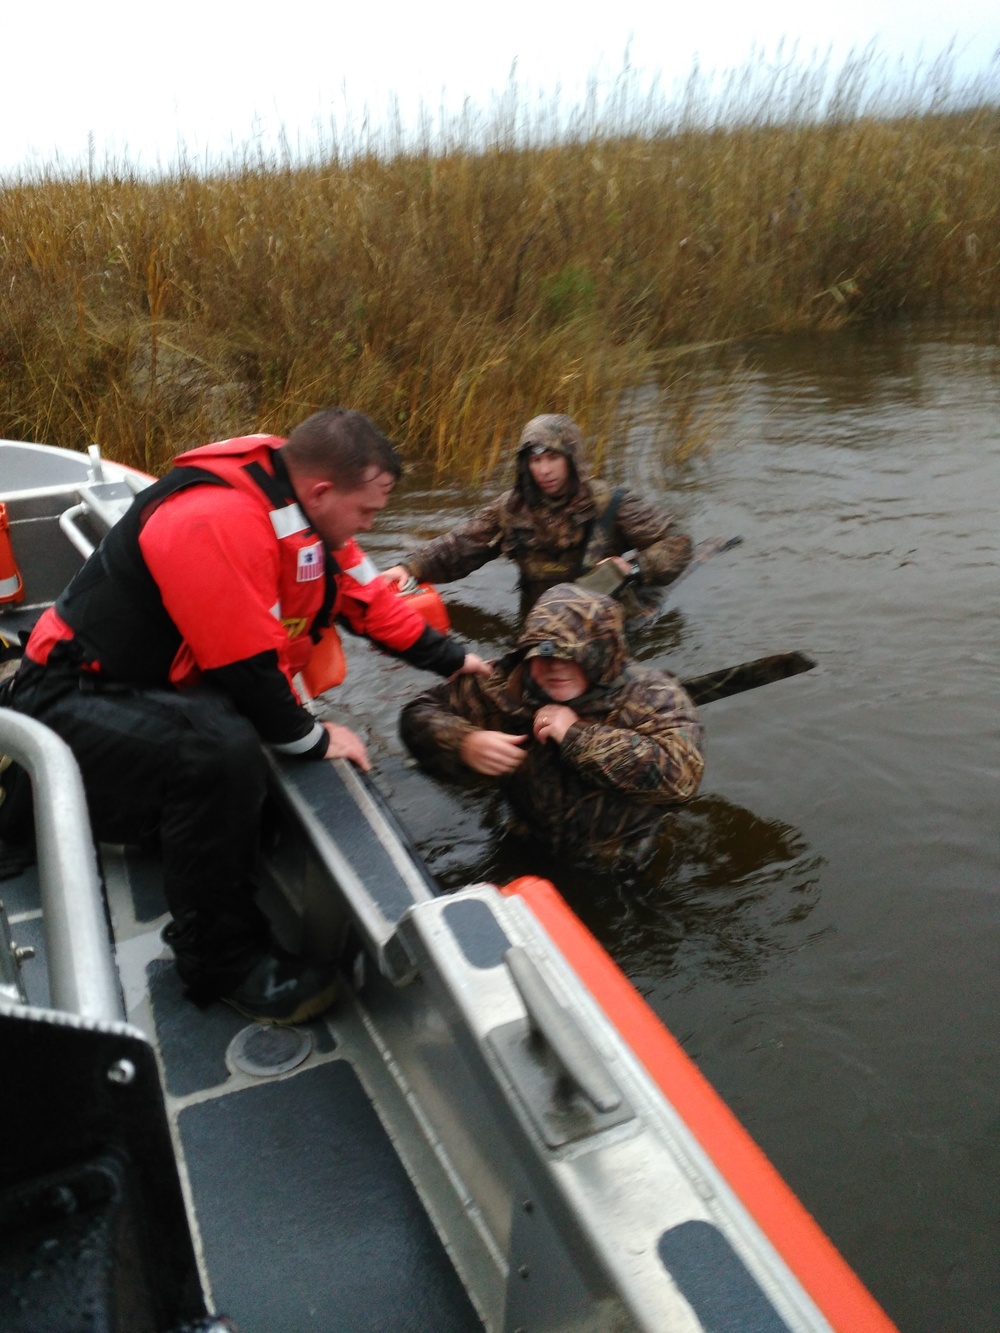 Coast Guard rescues 2 after boat runs agroud on Great Island, NC